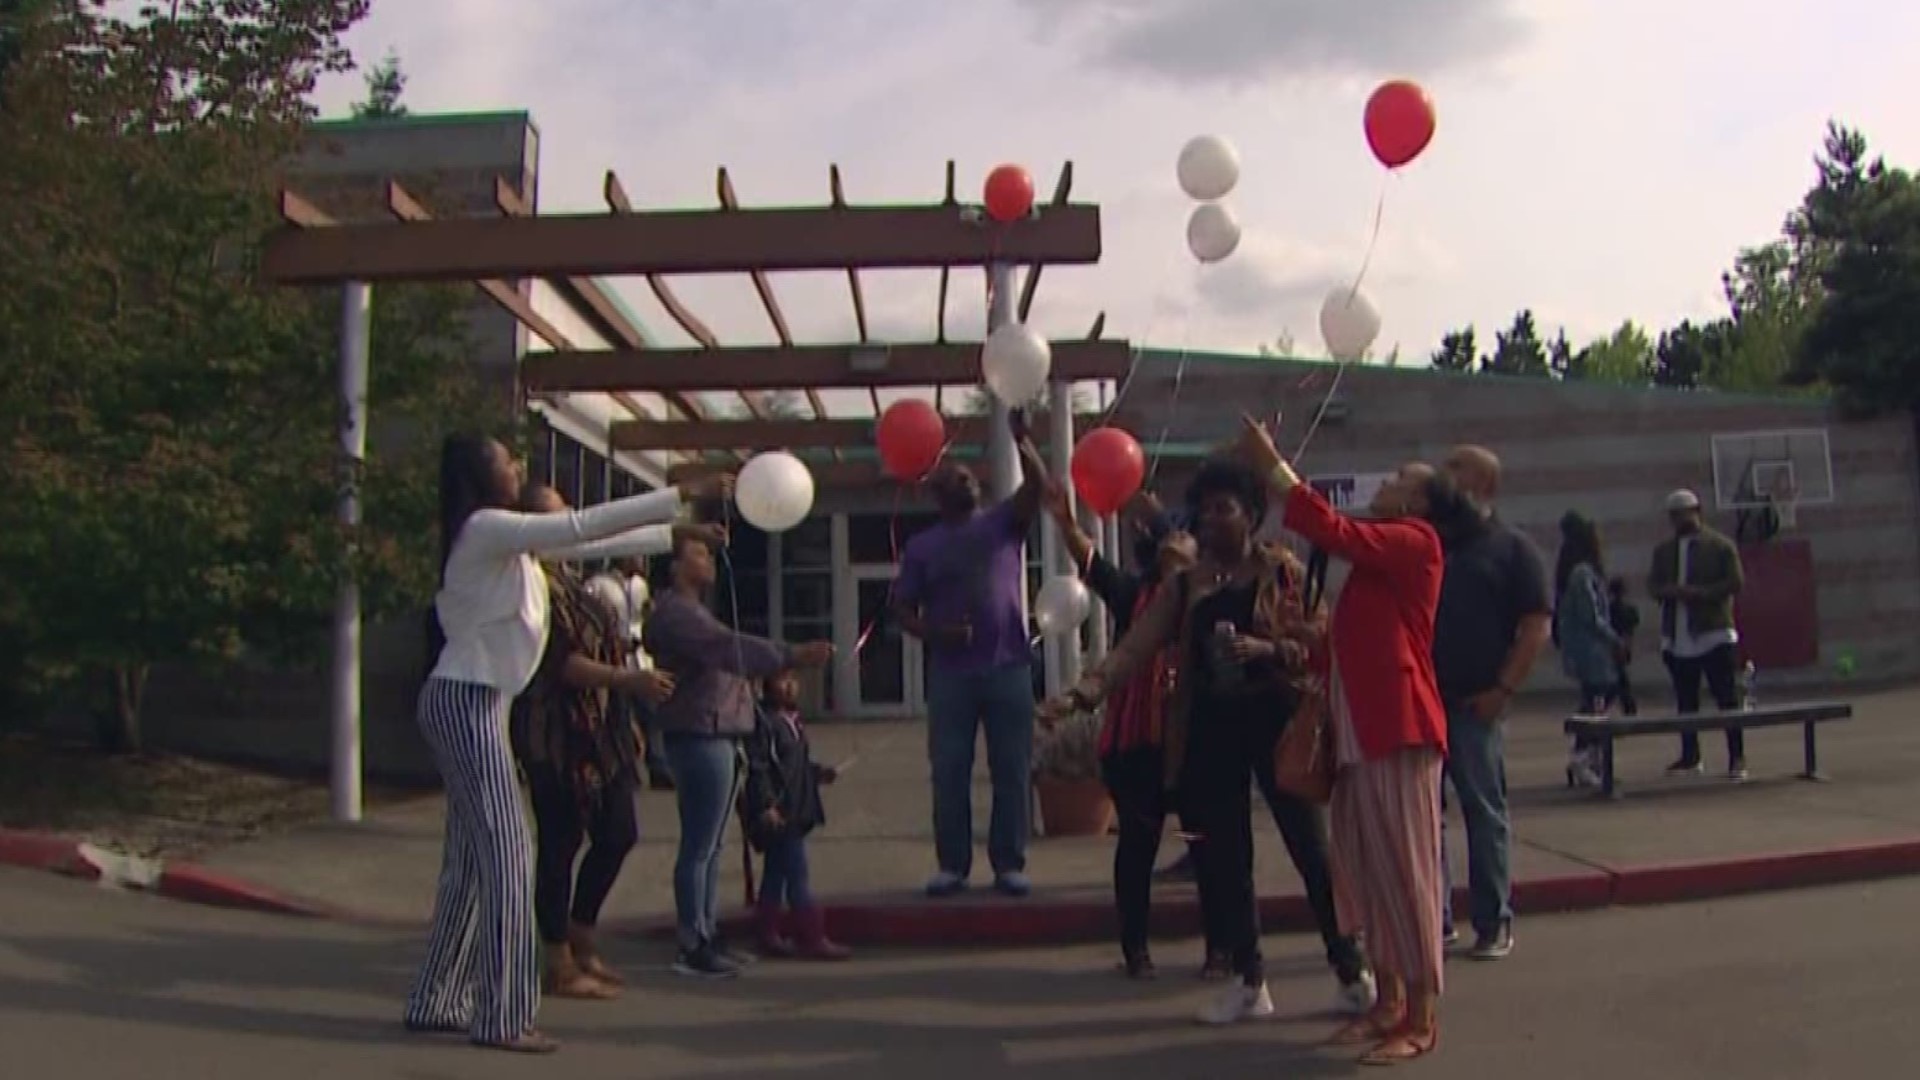 Royale Lexing, 19, was shot and killed earlier this month when someone opened fire on a group of people in Seattle’s Central District. He was involved in the community and was working to turn his life around through an organization called "Therapeutic Health Services." The organization held a memorial for Lexing in his honor on Wednesday.